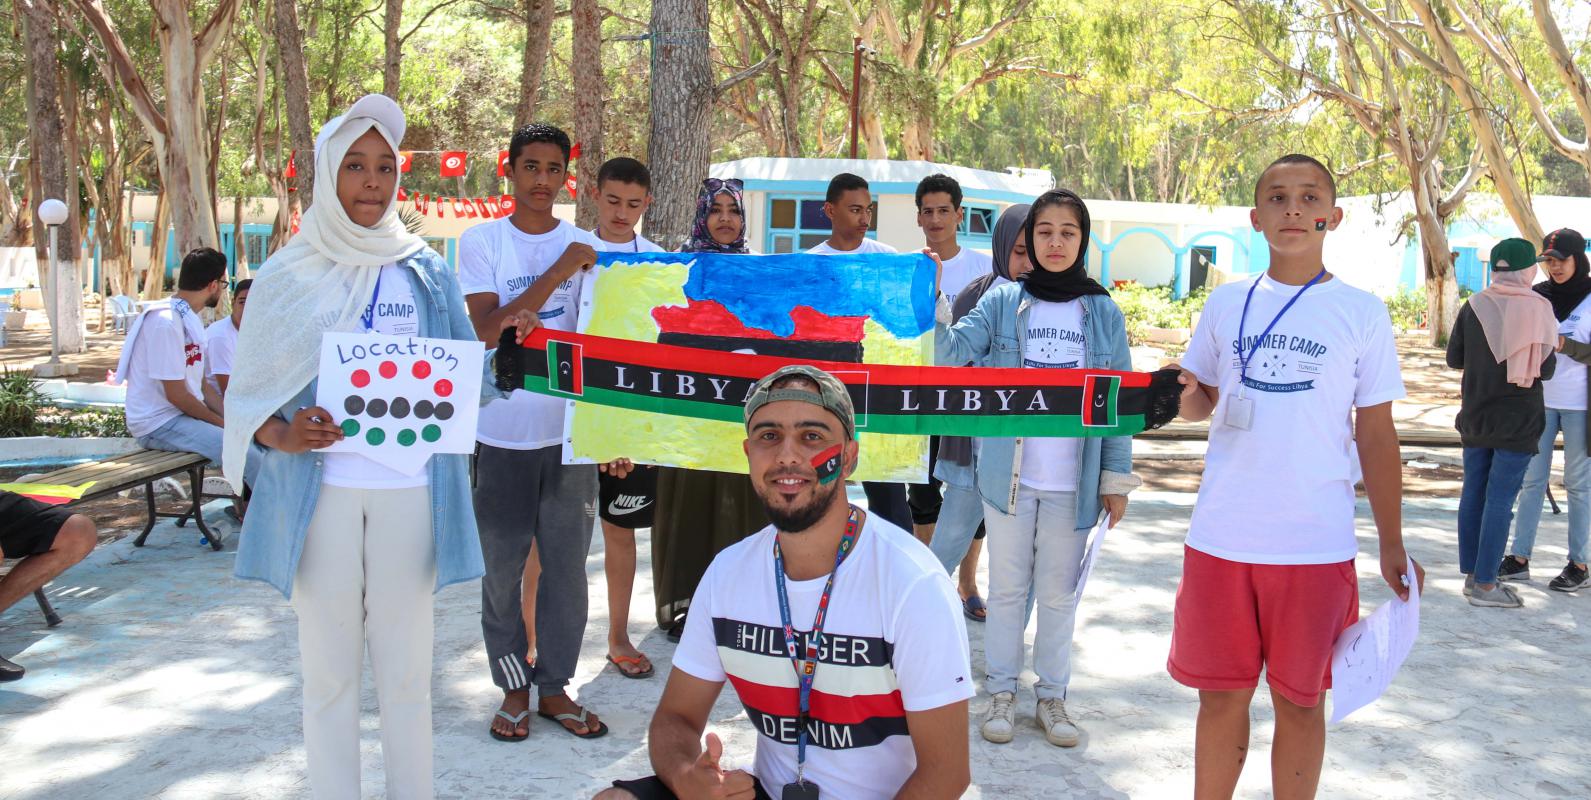 A group of young Libyans at a summer camp, holding the Libyan flag